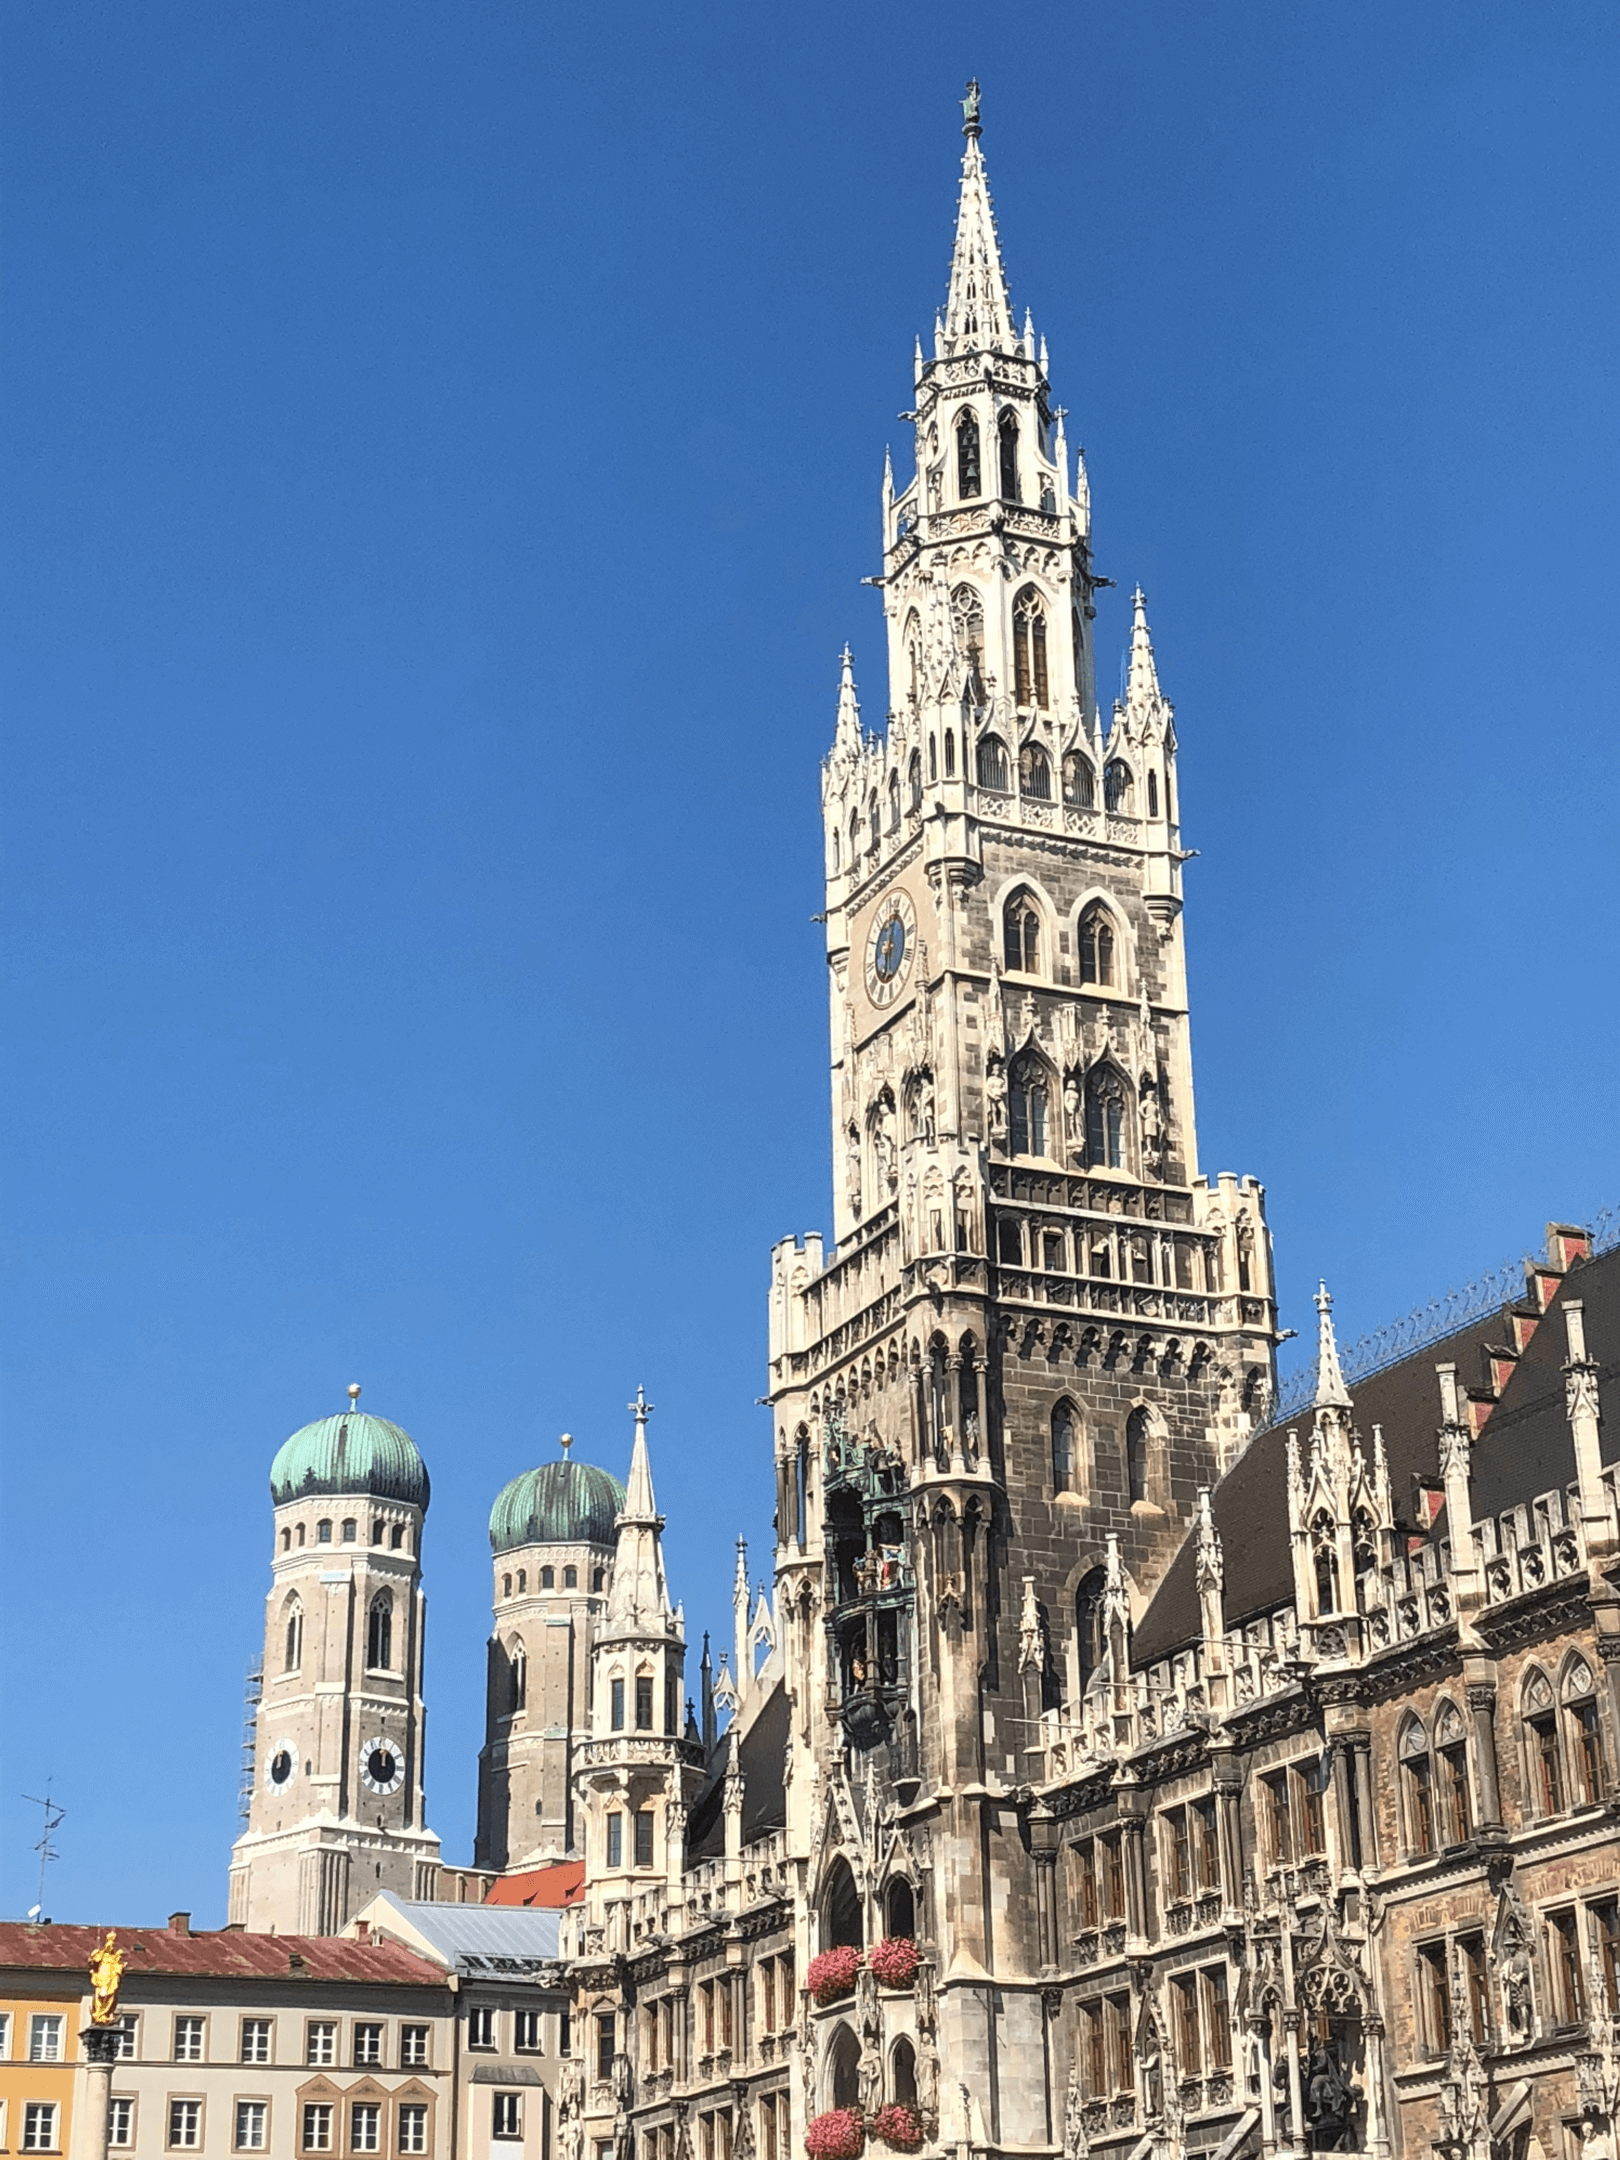 New City Hall in Front of Frauenkirche Towers in Munich